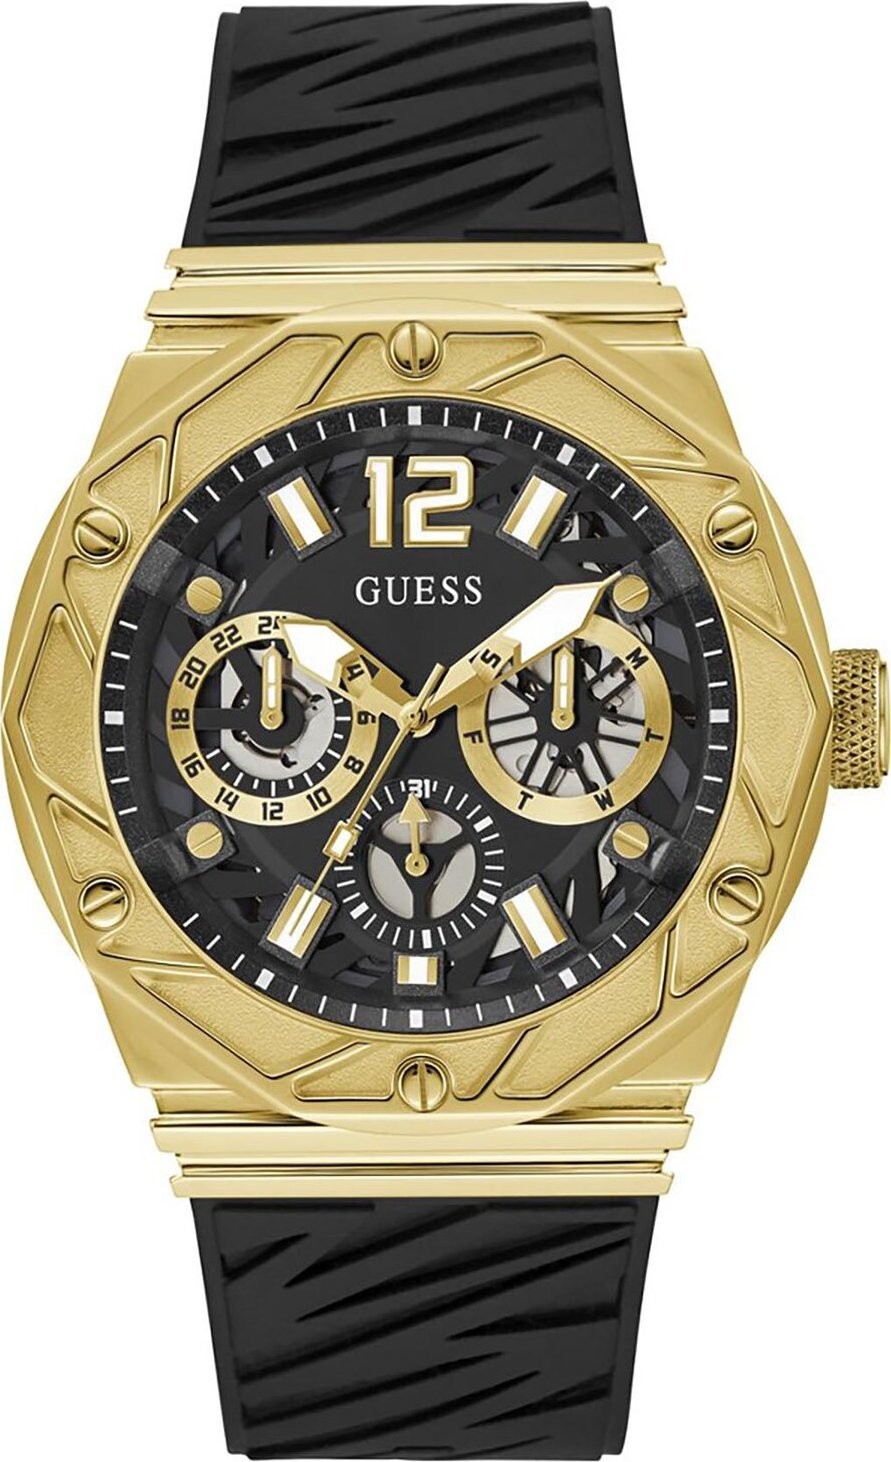 Hodinky Guess Indy GW0634G2 BLACK/GOLD